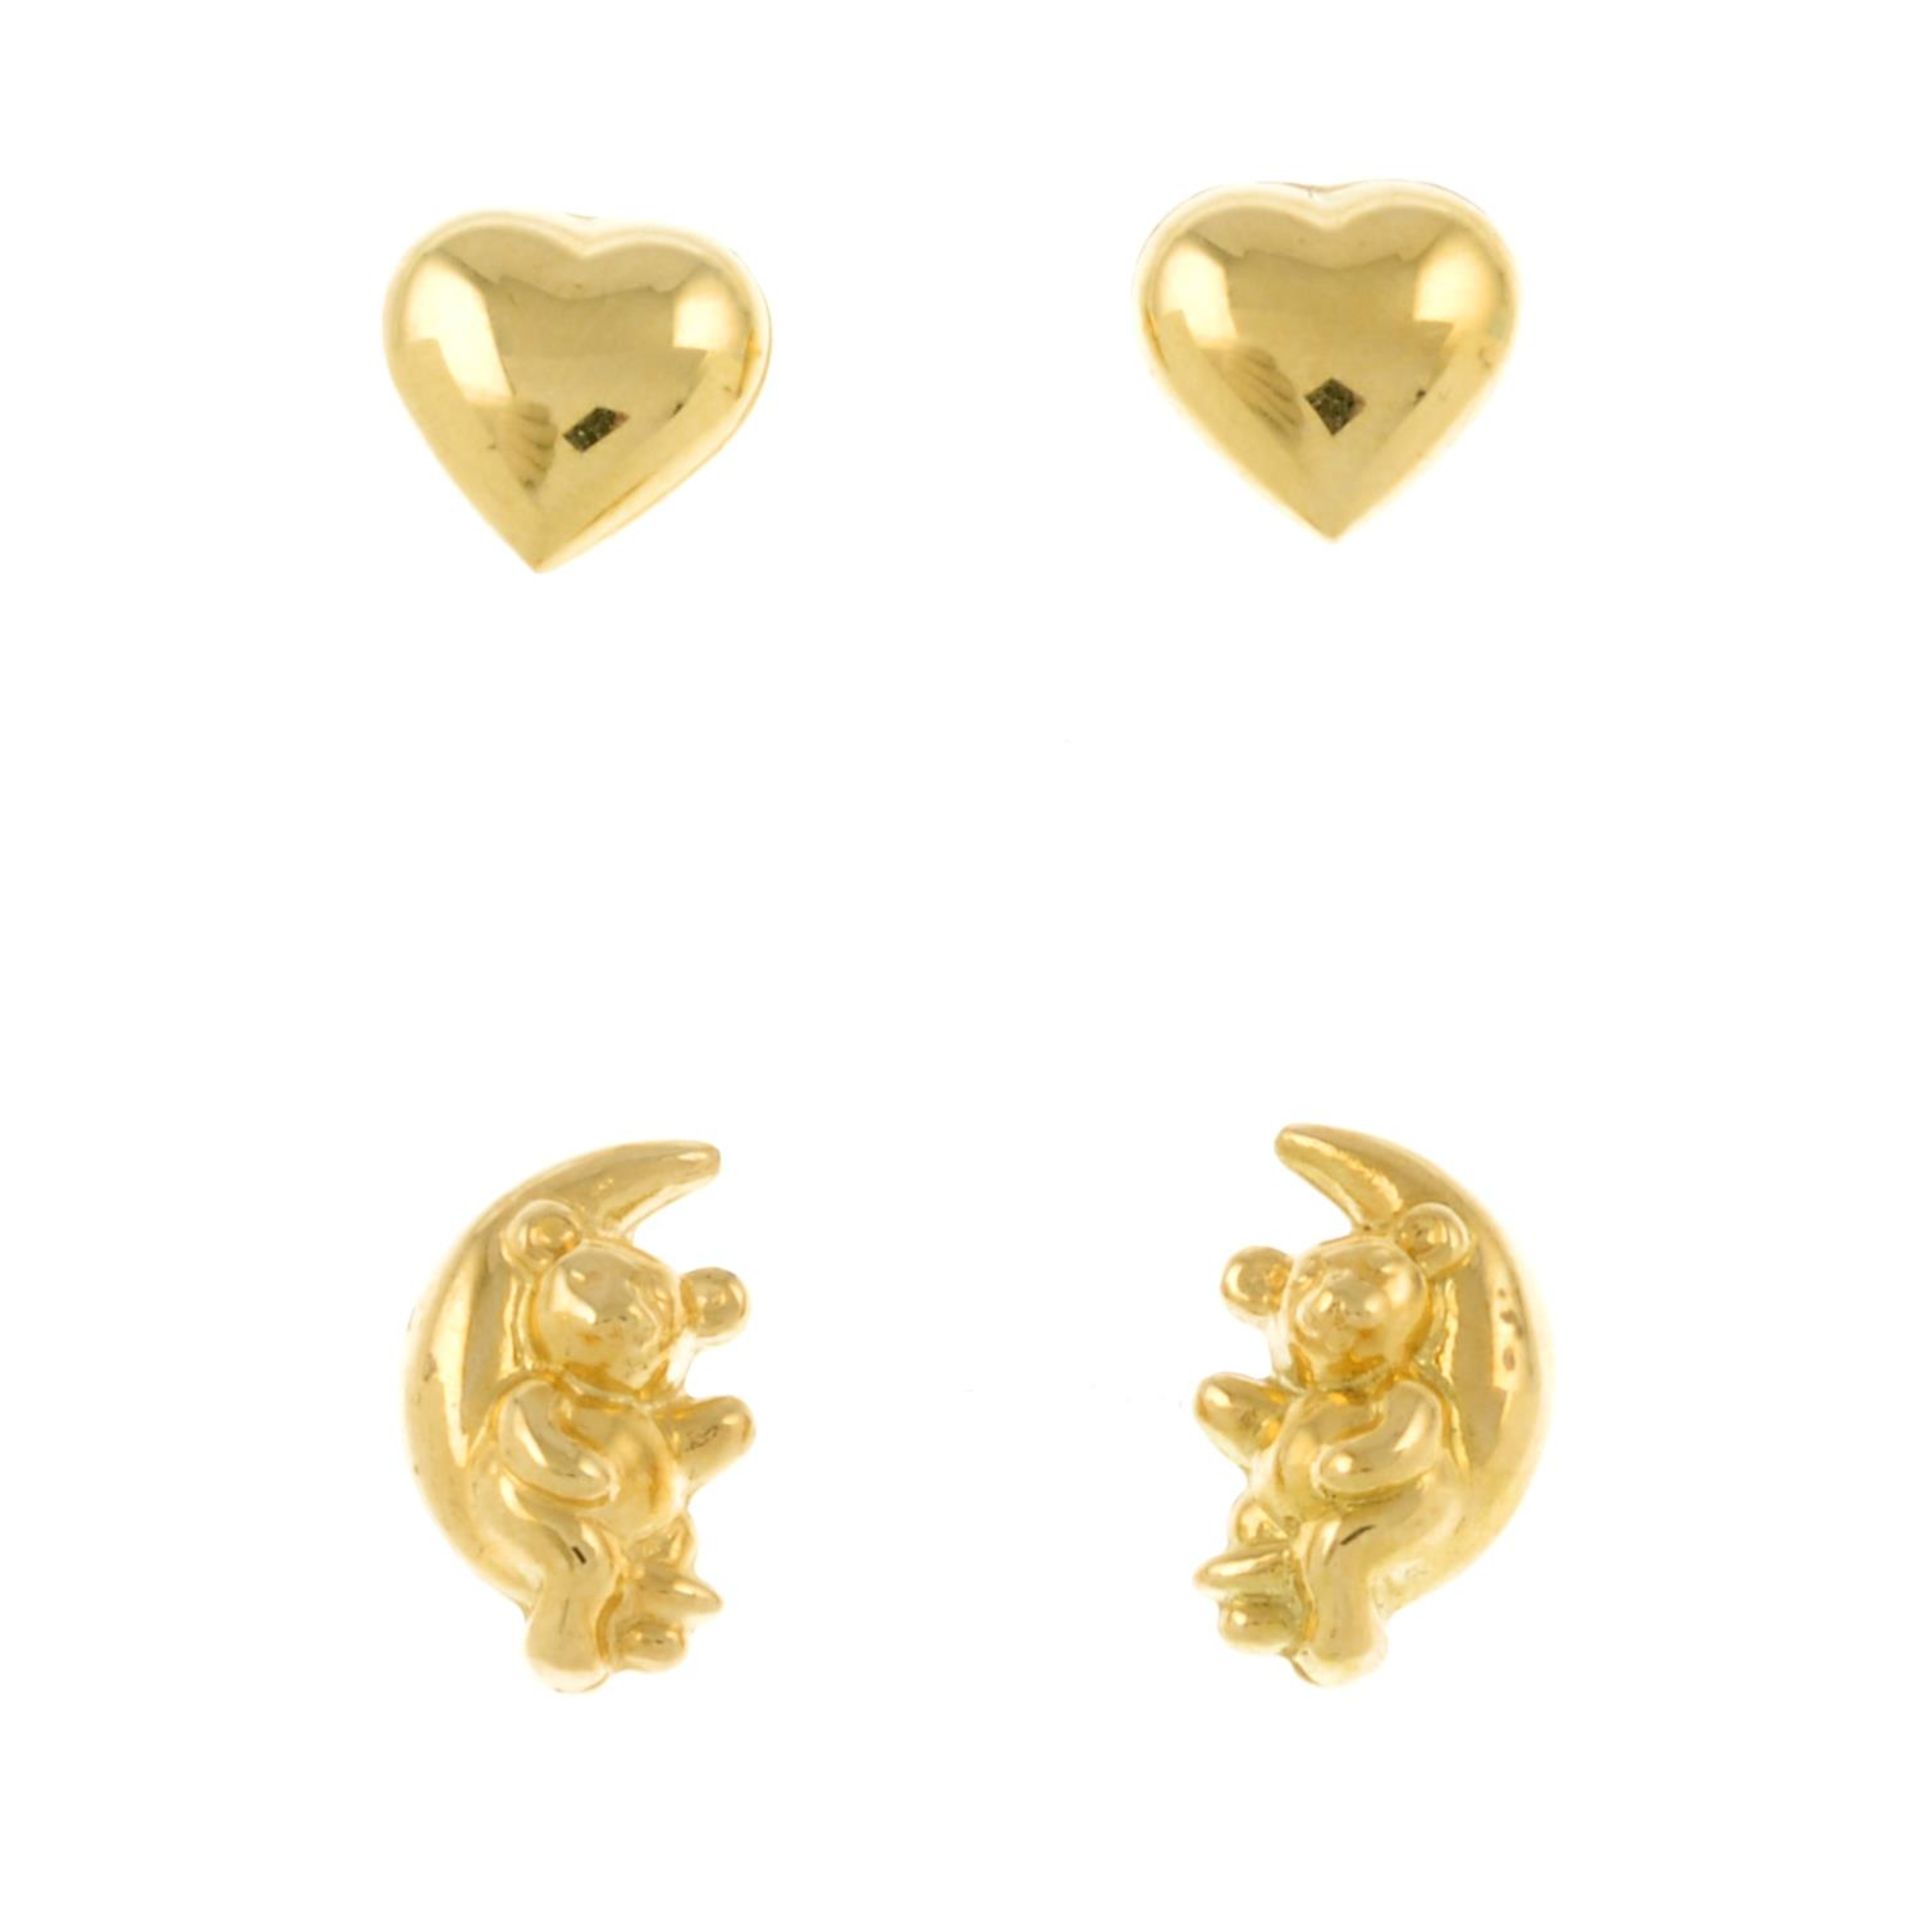 Two pairs of 18ct gold stud earrings.Hallmarks for Italy.Lengths 0.8 and 1.1cms.